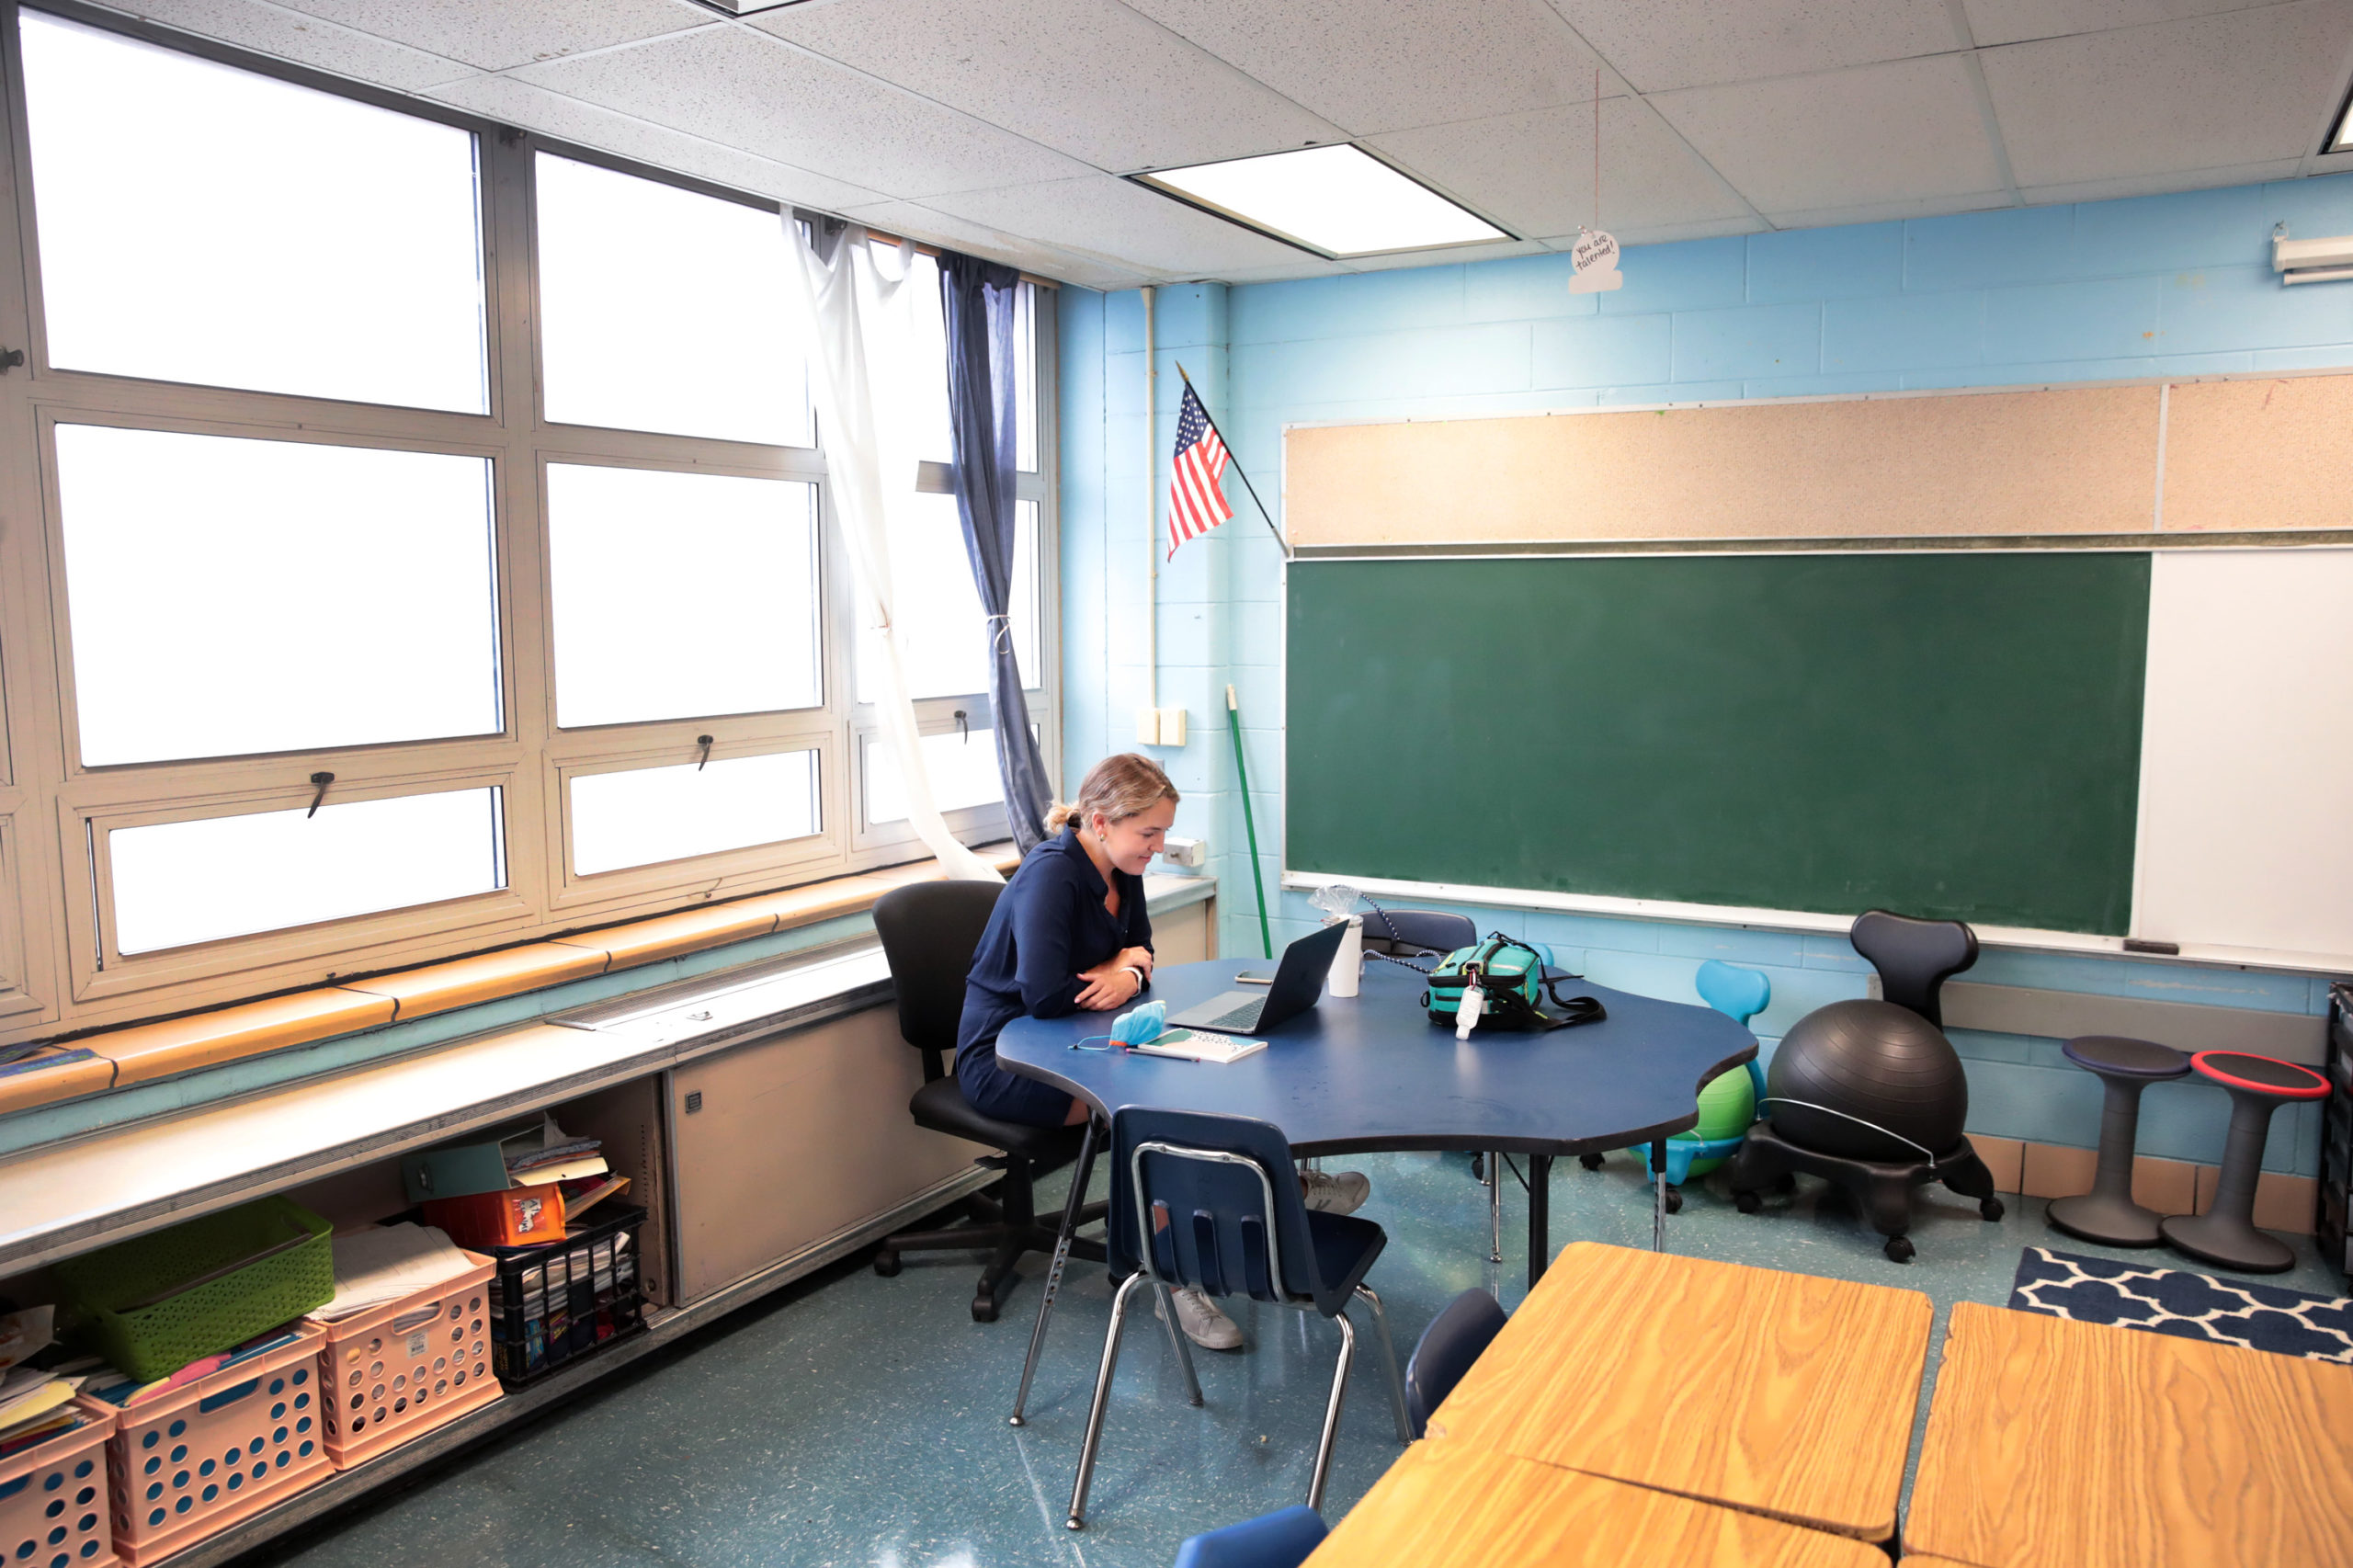 Lucy Baldwin, a teacher at King Elementary School, sits in an empty classroom teaching her students remotely during the first day of classes on September 08, 2020 in Chicago, Illinois. Students at King Elementary and the rest of Chicago public schools started classes today with students being taught remotely because of COVID-19 concerns. Teachers are given the option to teach from home or from their classrooms. (Photo by Scott Olson/Getty Images)